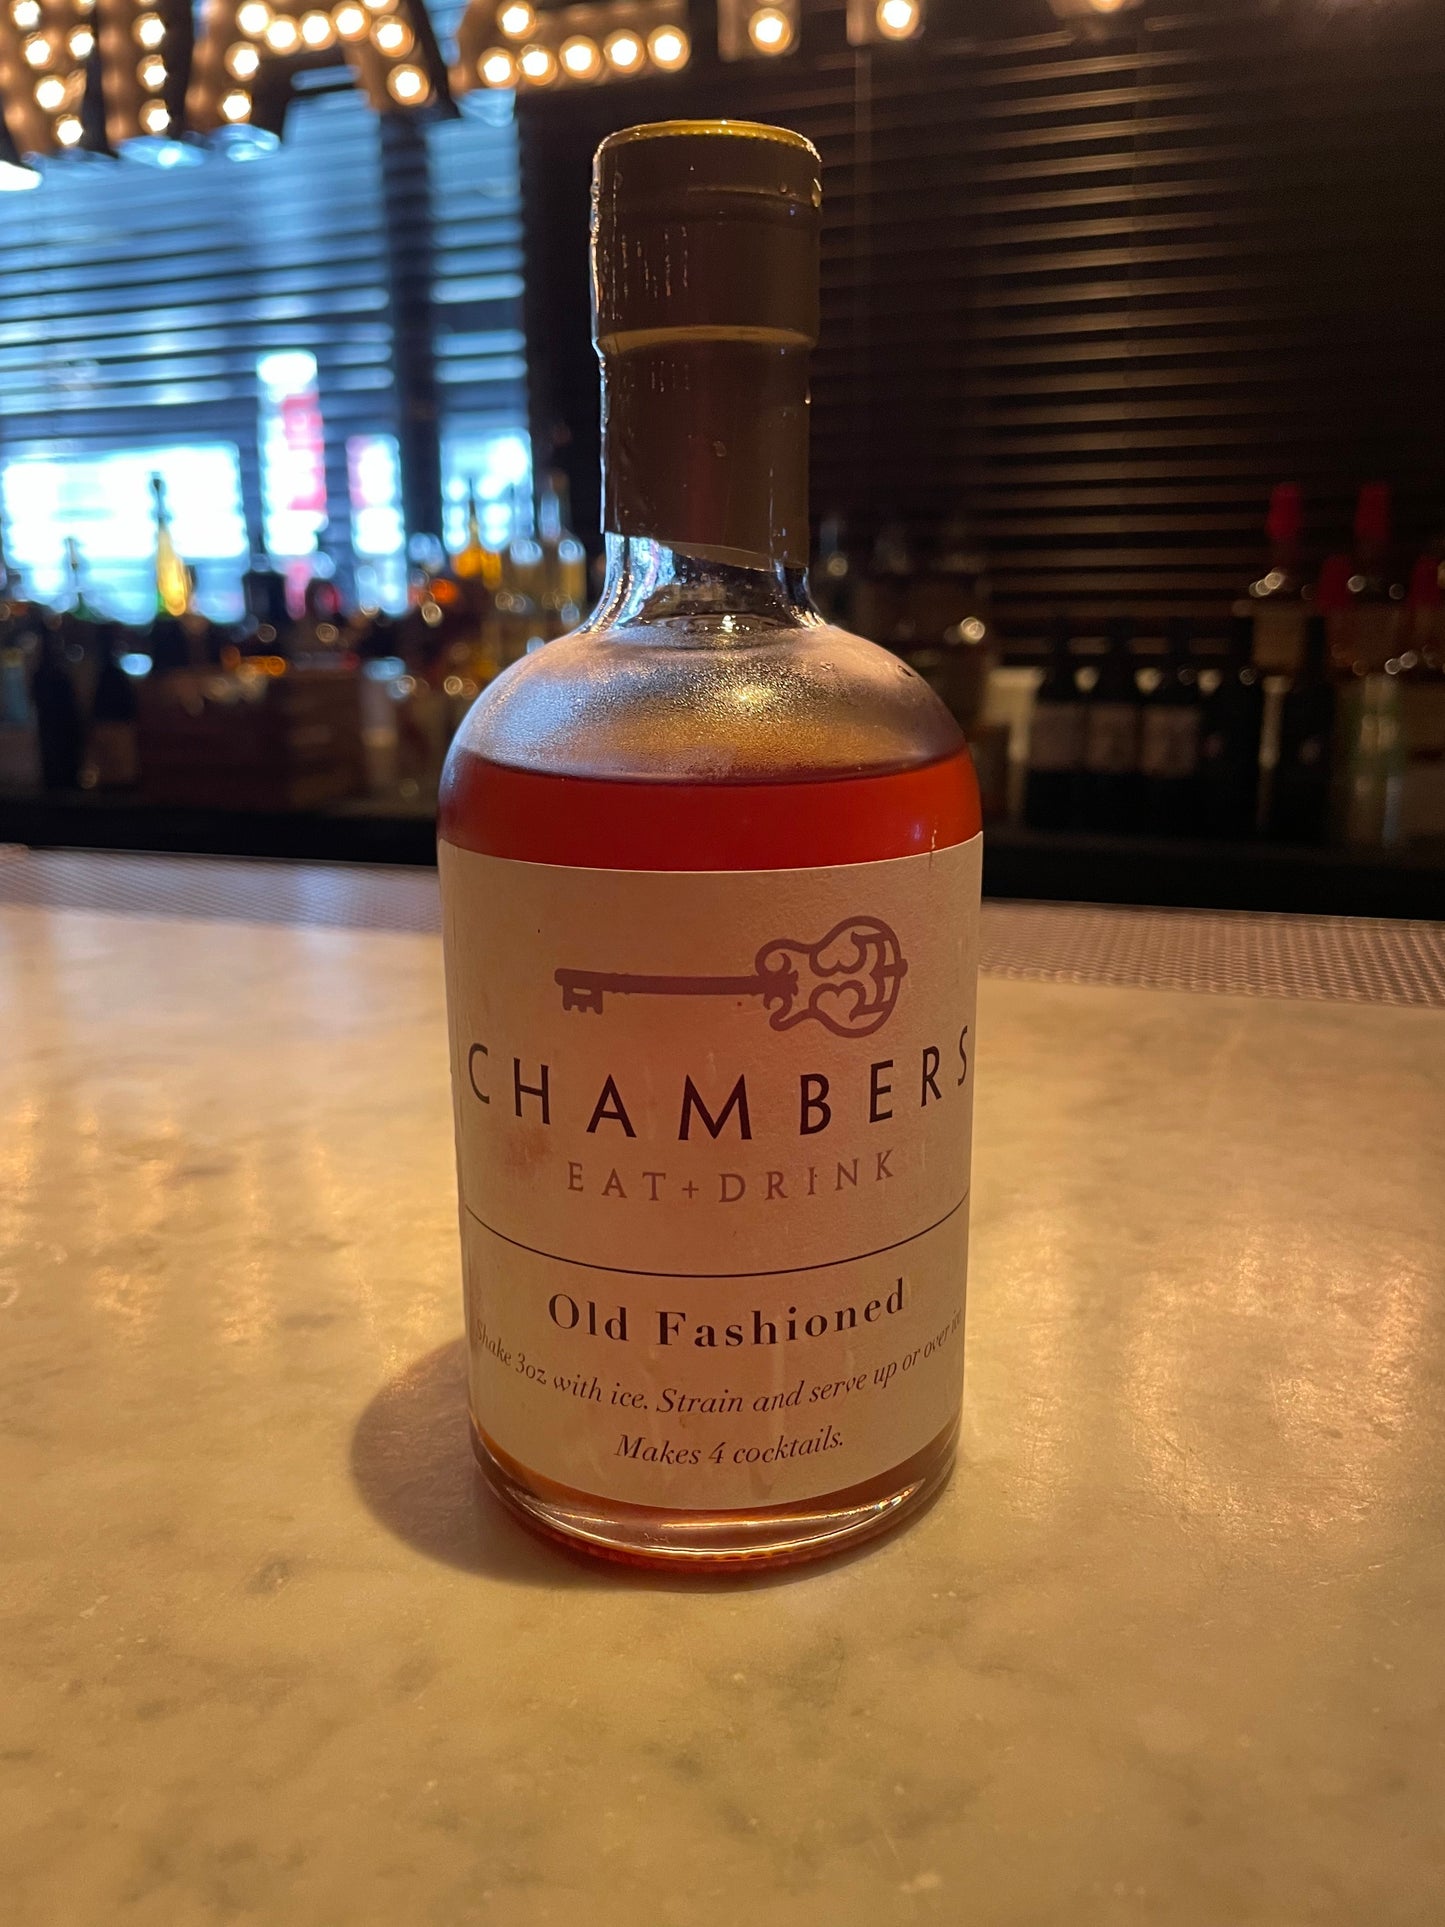 Chambers Old Fashioned